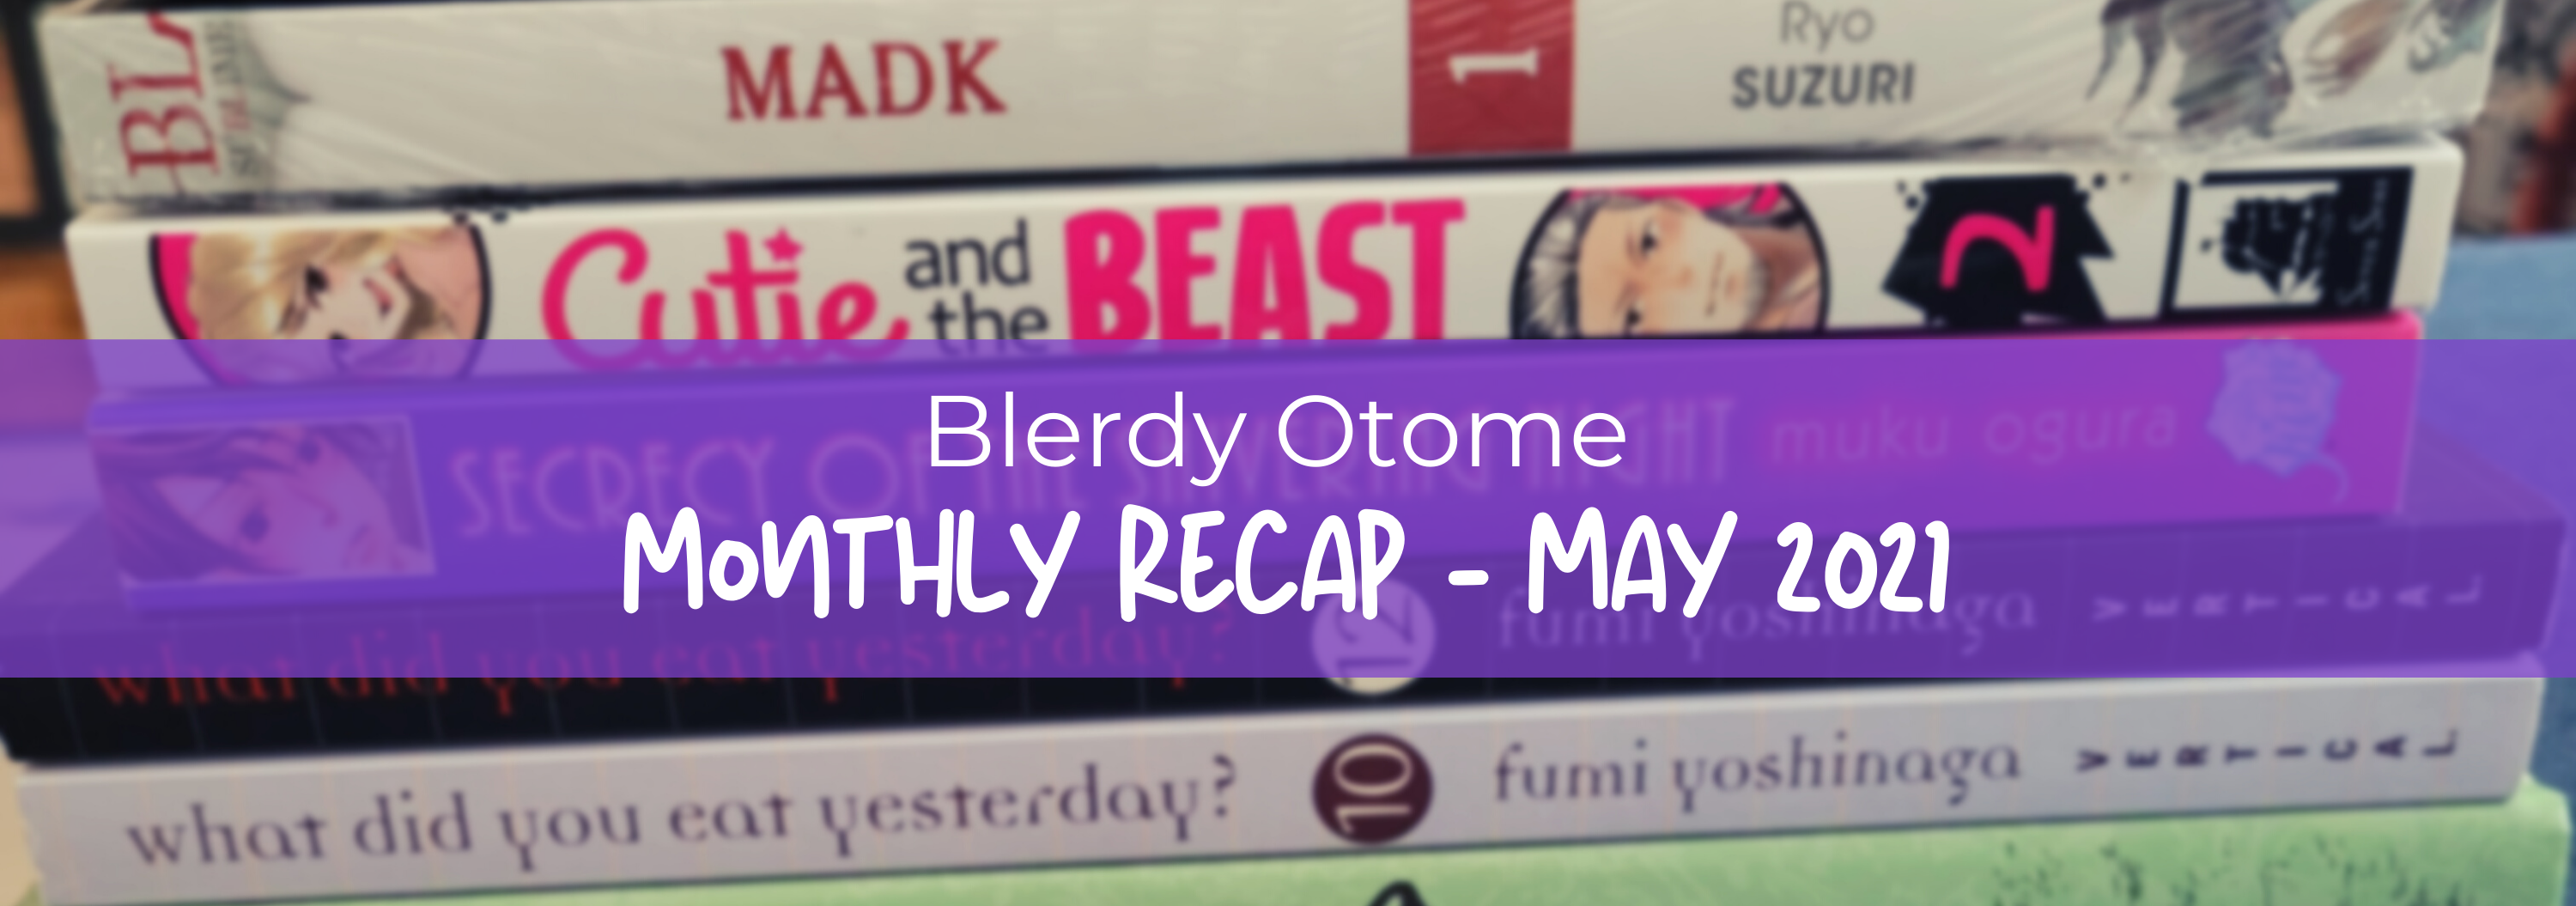 Blerdy Otome Monthly Recap -May 2021